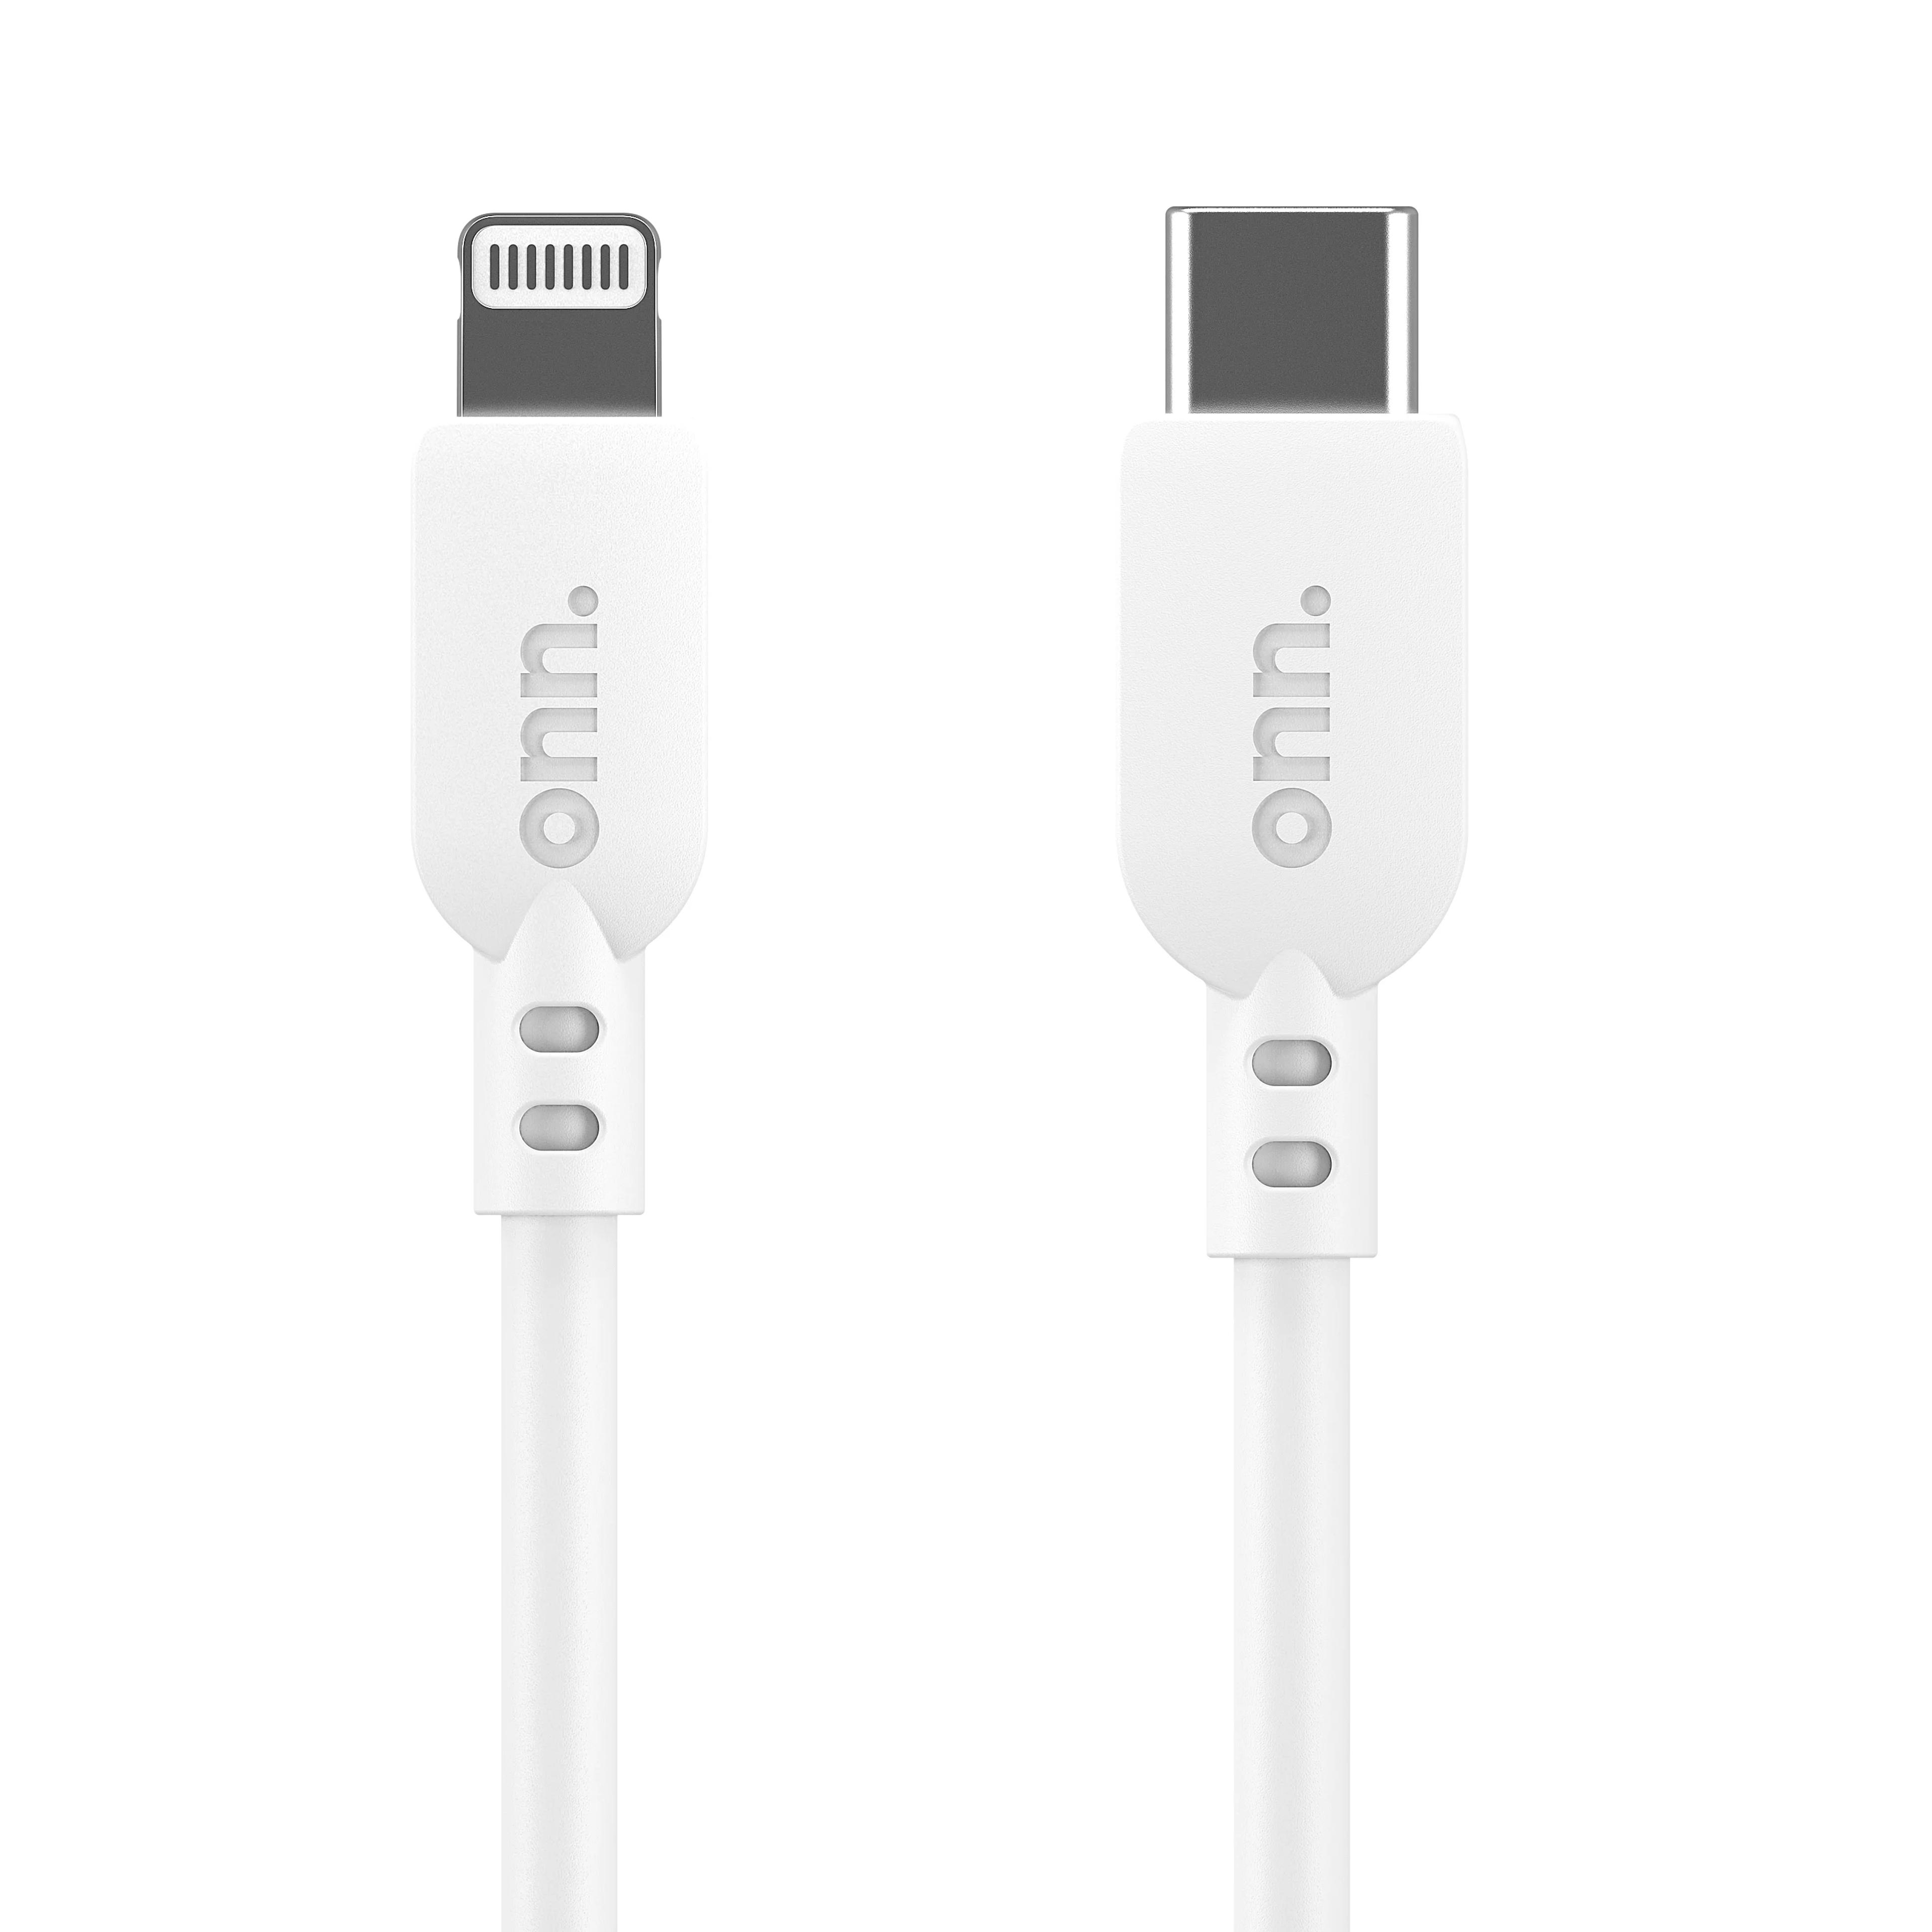 onn. 6' Lightning to USB-C Cable, White